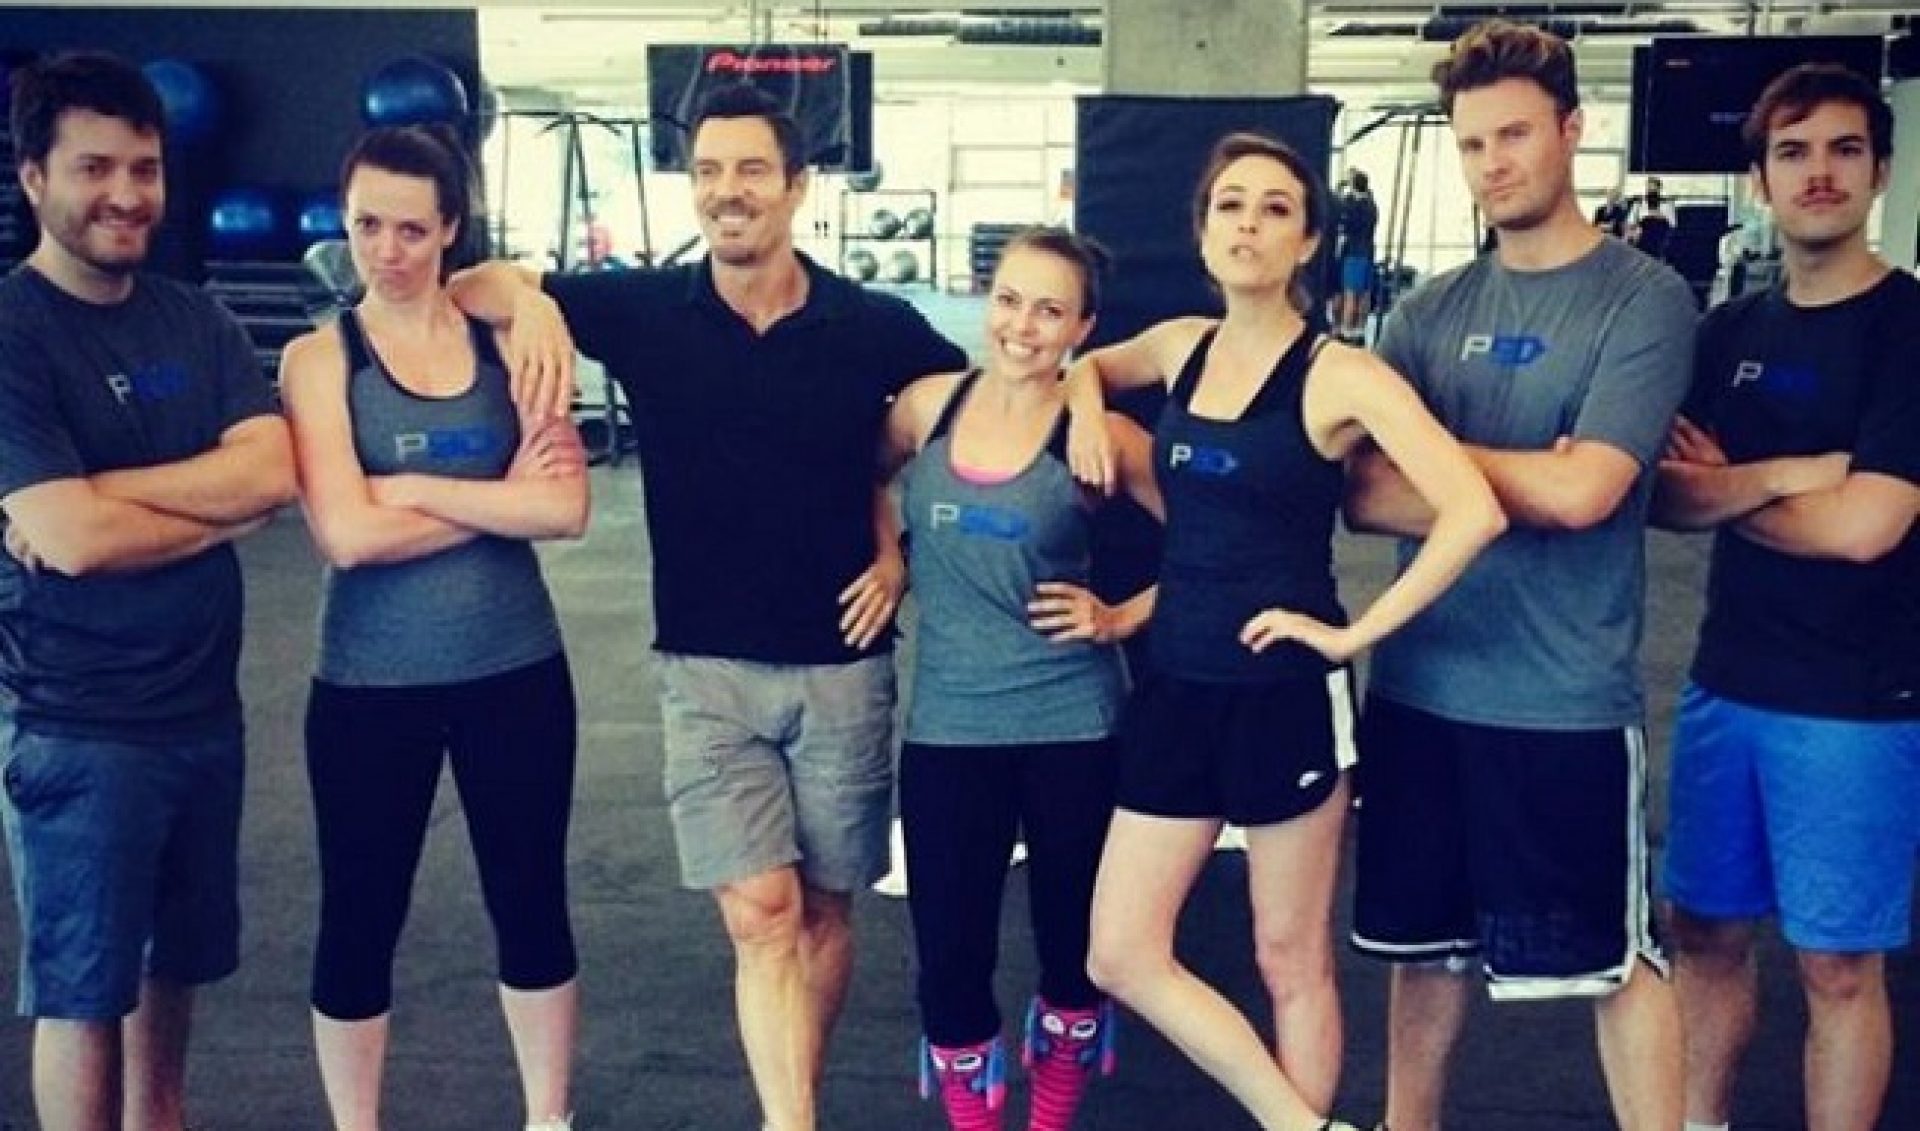 YouTube Stars Train With Beachbody, Net 2 Million Views (Before and After Photos)